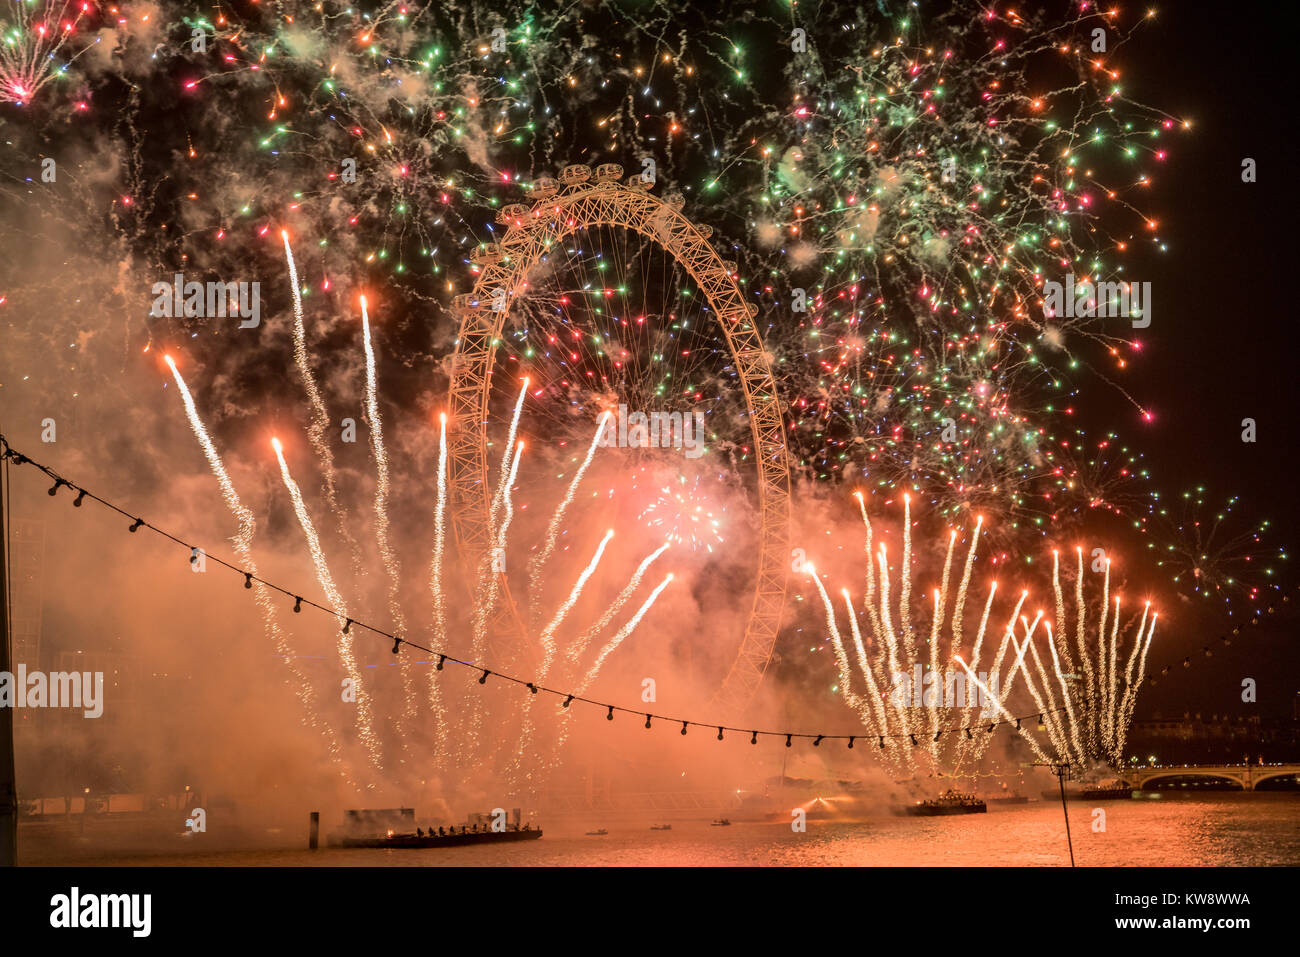 London, England, UK. 31 Dec 2017. Thousands attends the 2018 London’s New Year’s Eve fireworks at the Embankment. Stock Photo